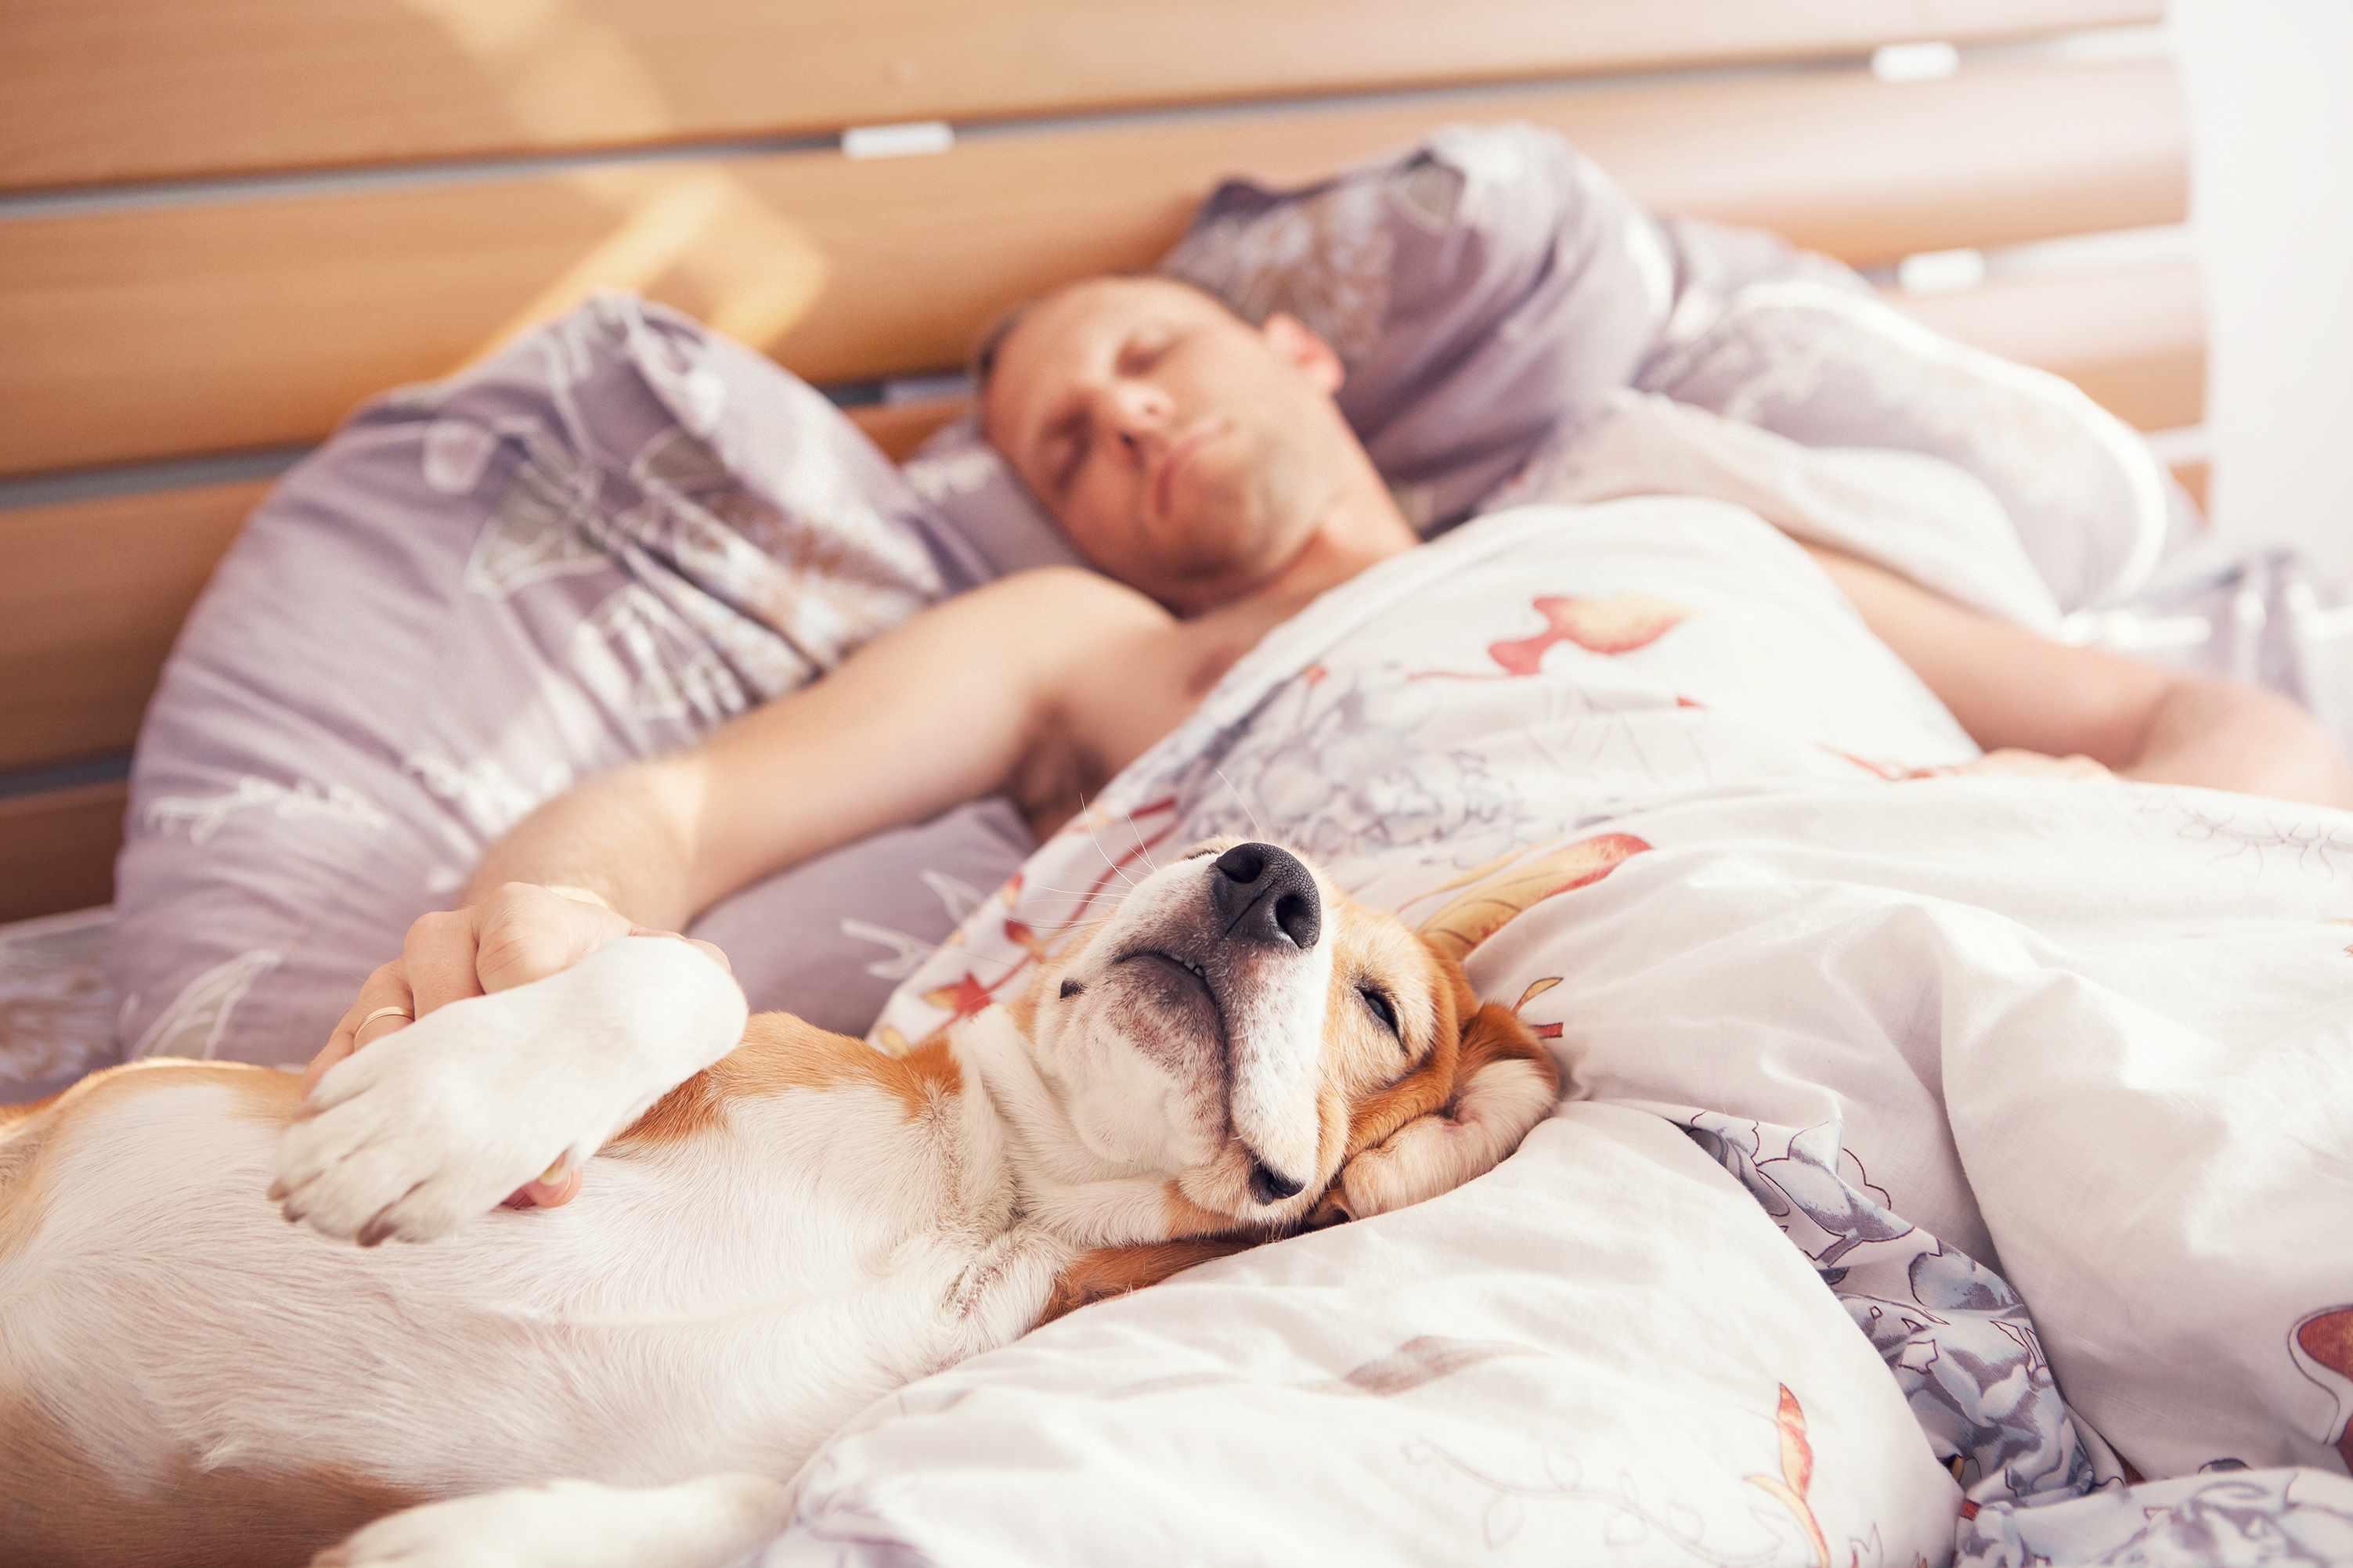 two pets, a cat and a dog, sleeping on someone's bed with pillows